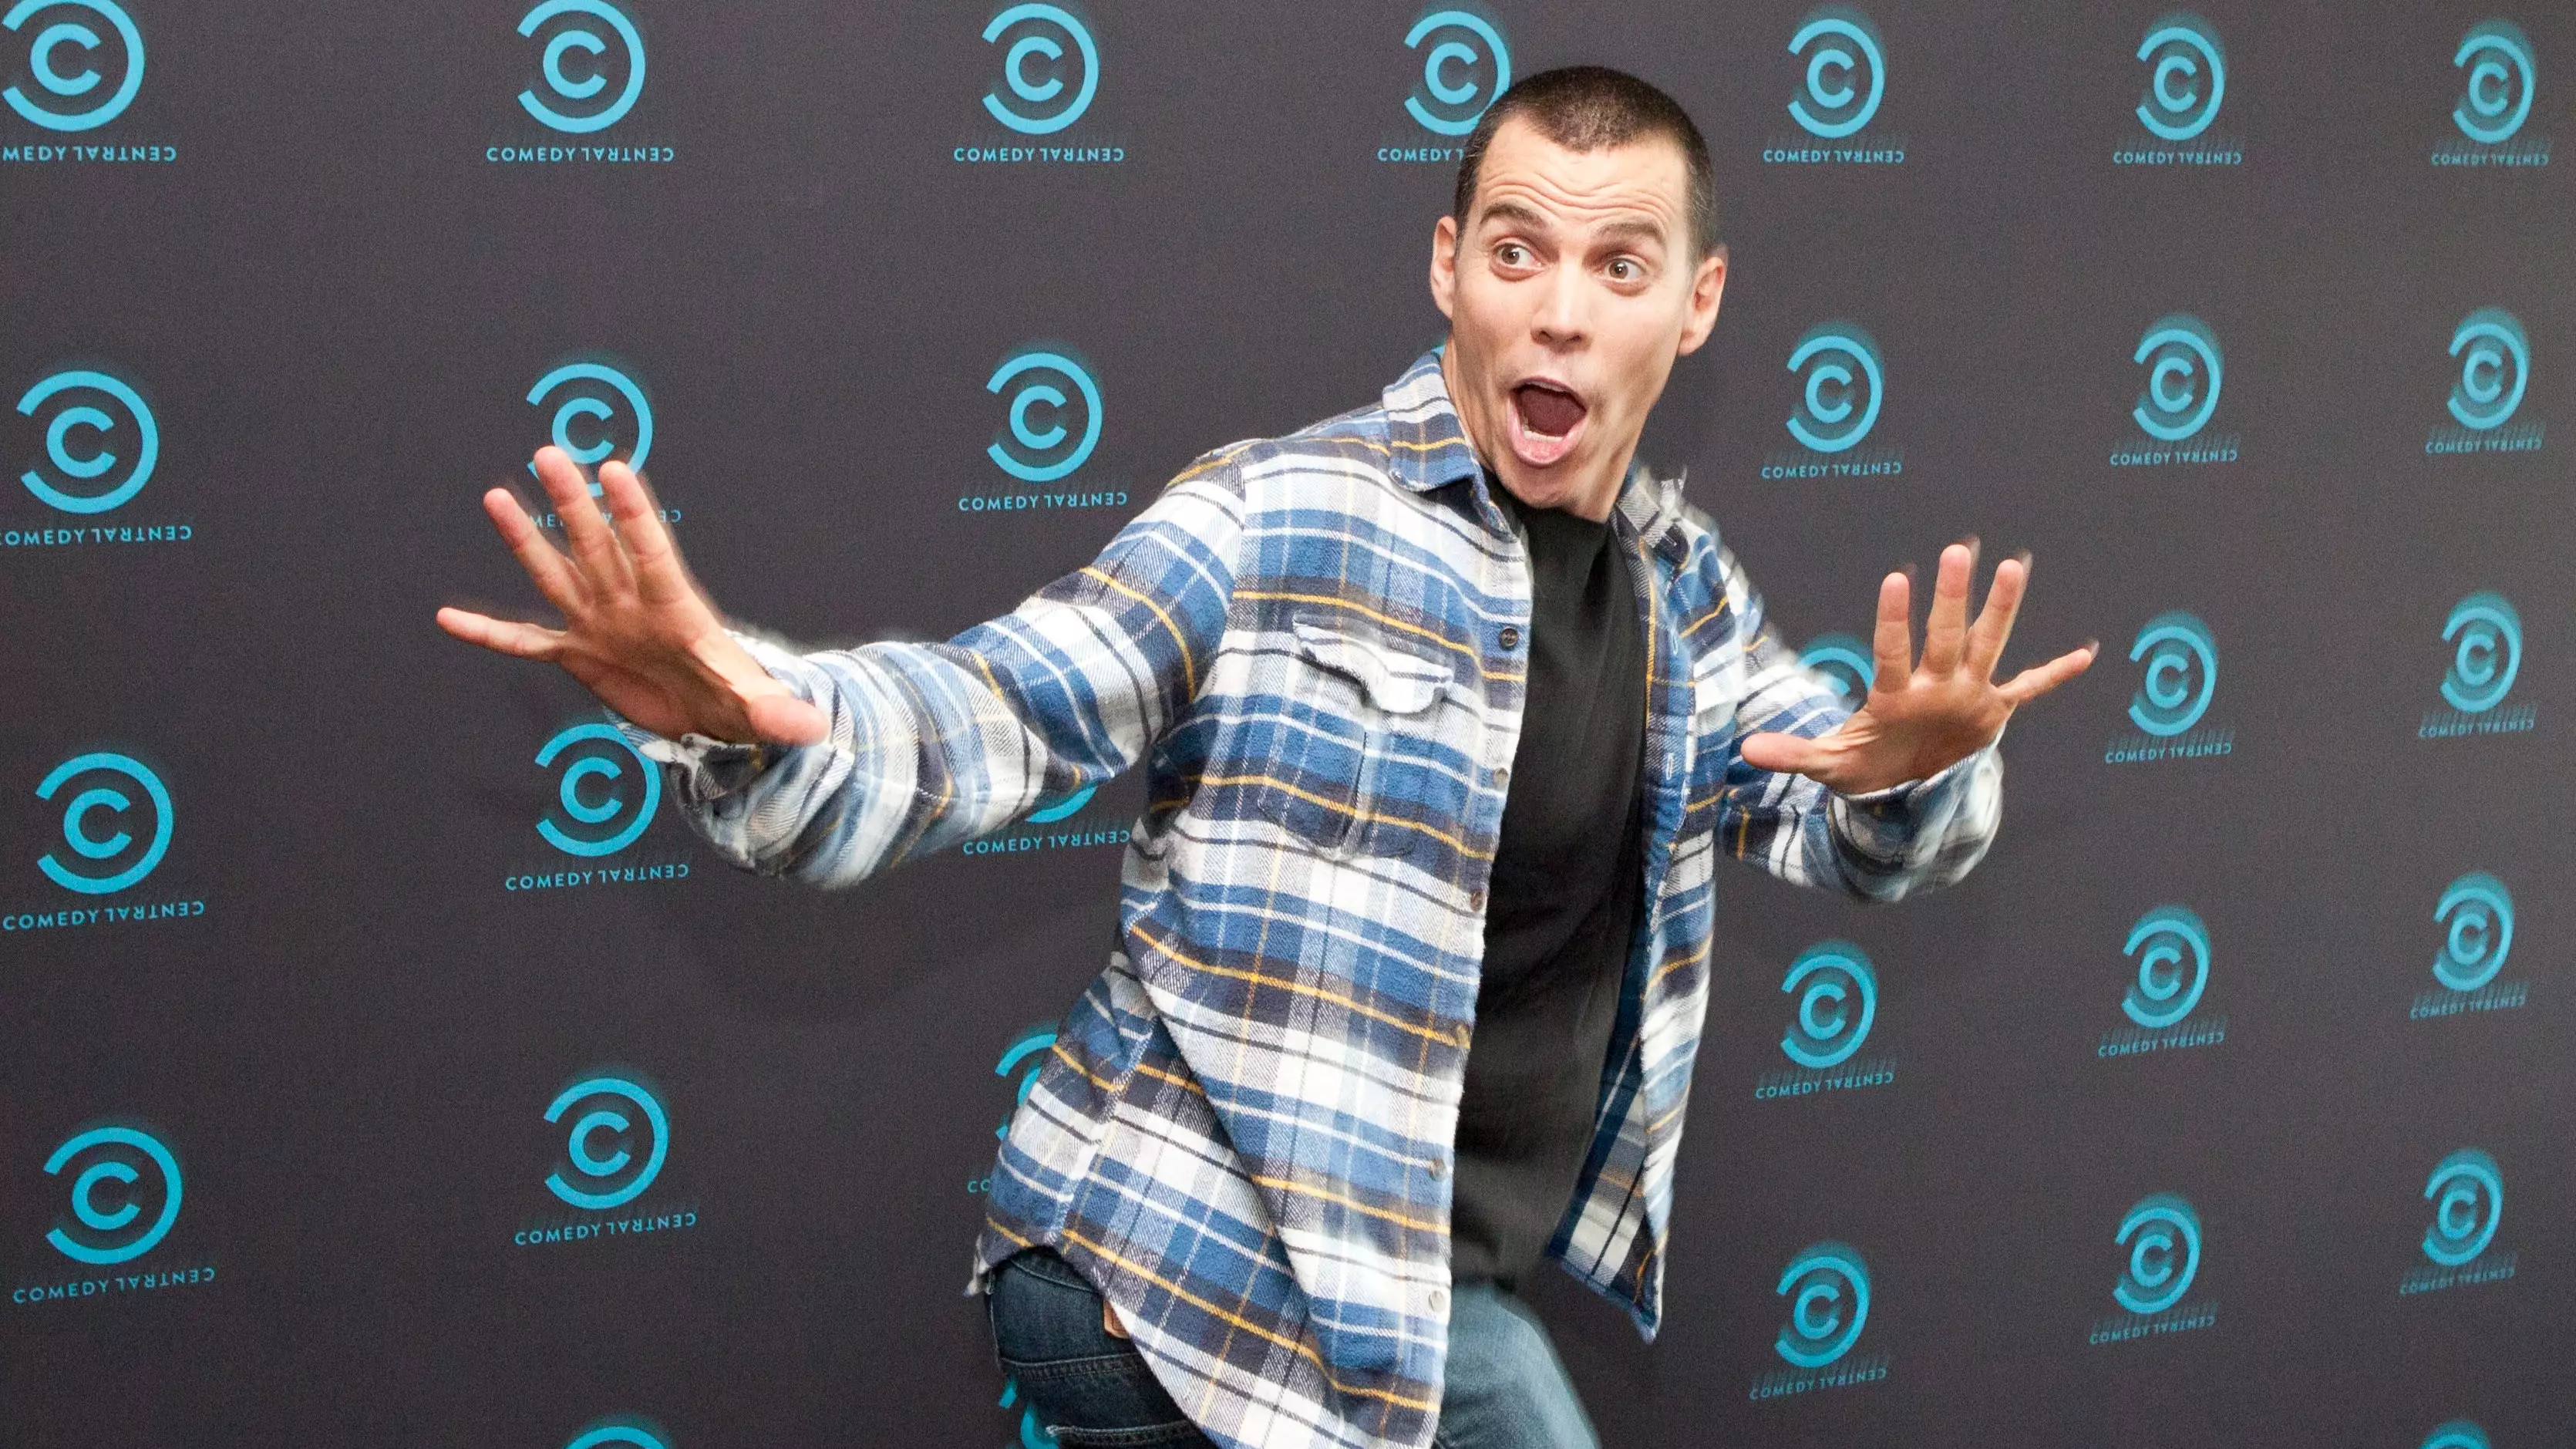 Steve-O Is Being Trolled By Vegans For His Controversial Instagram Post